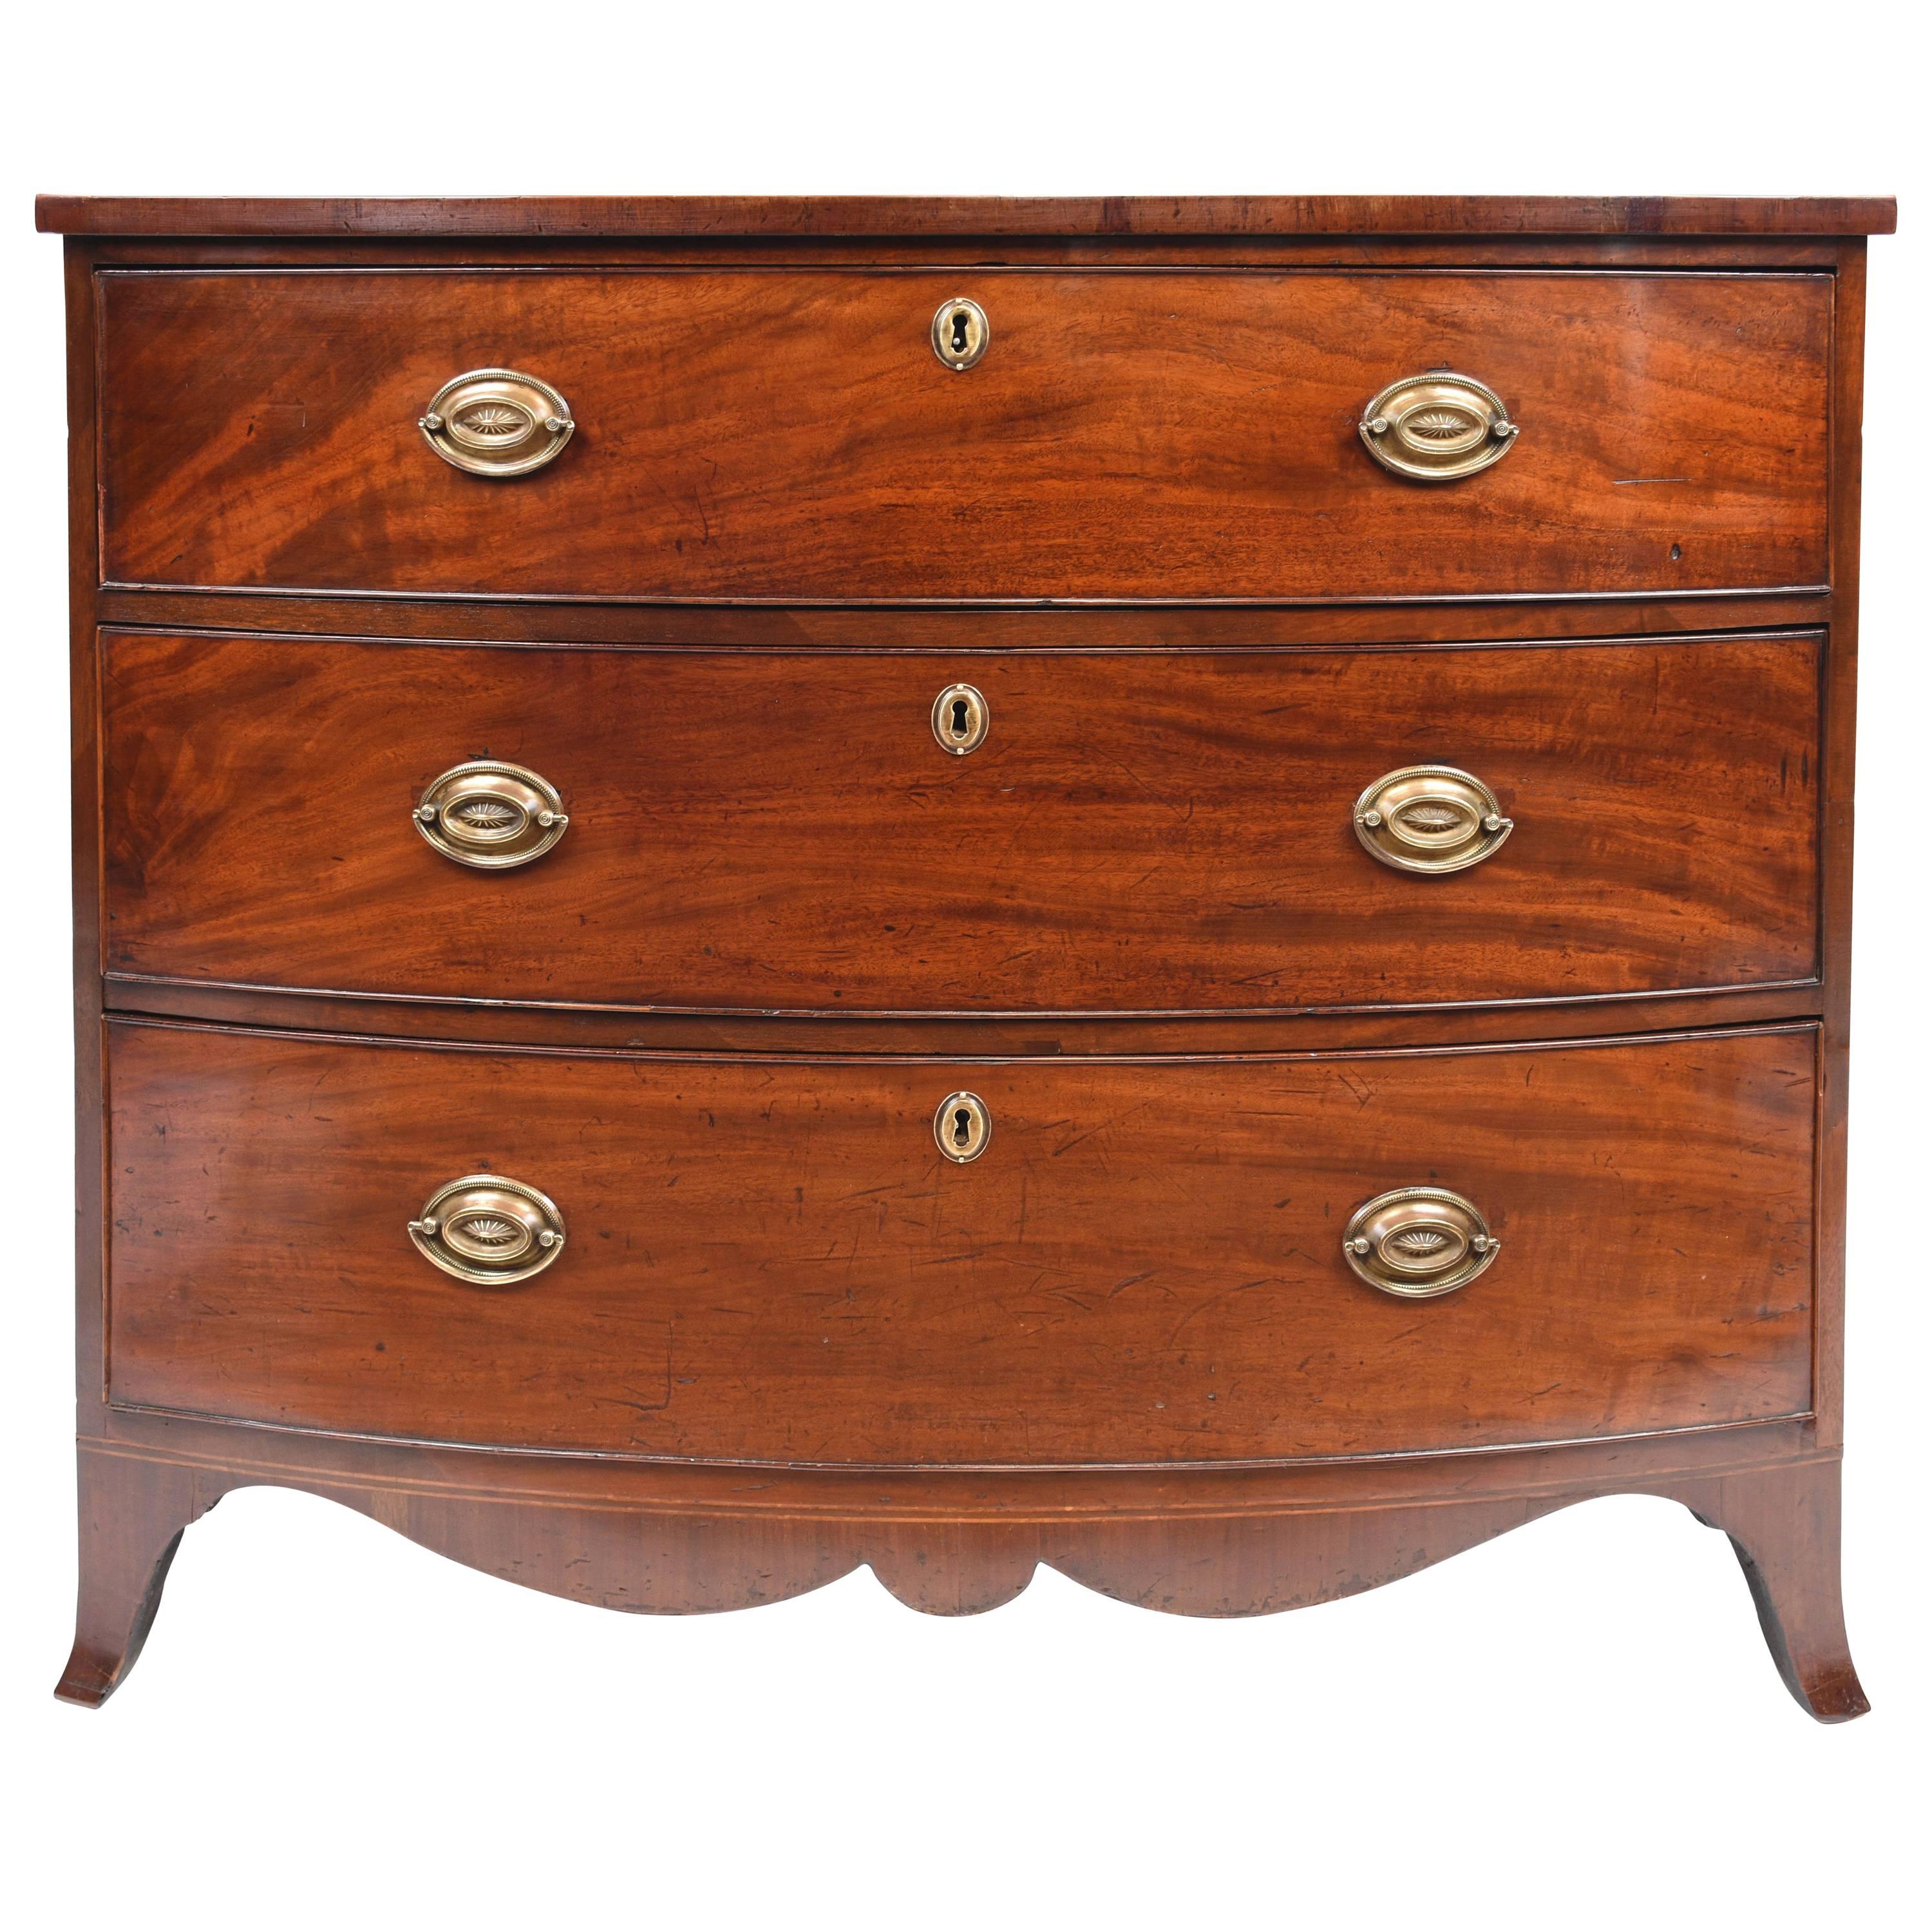 19th Century George III Style Chest of Drawers